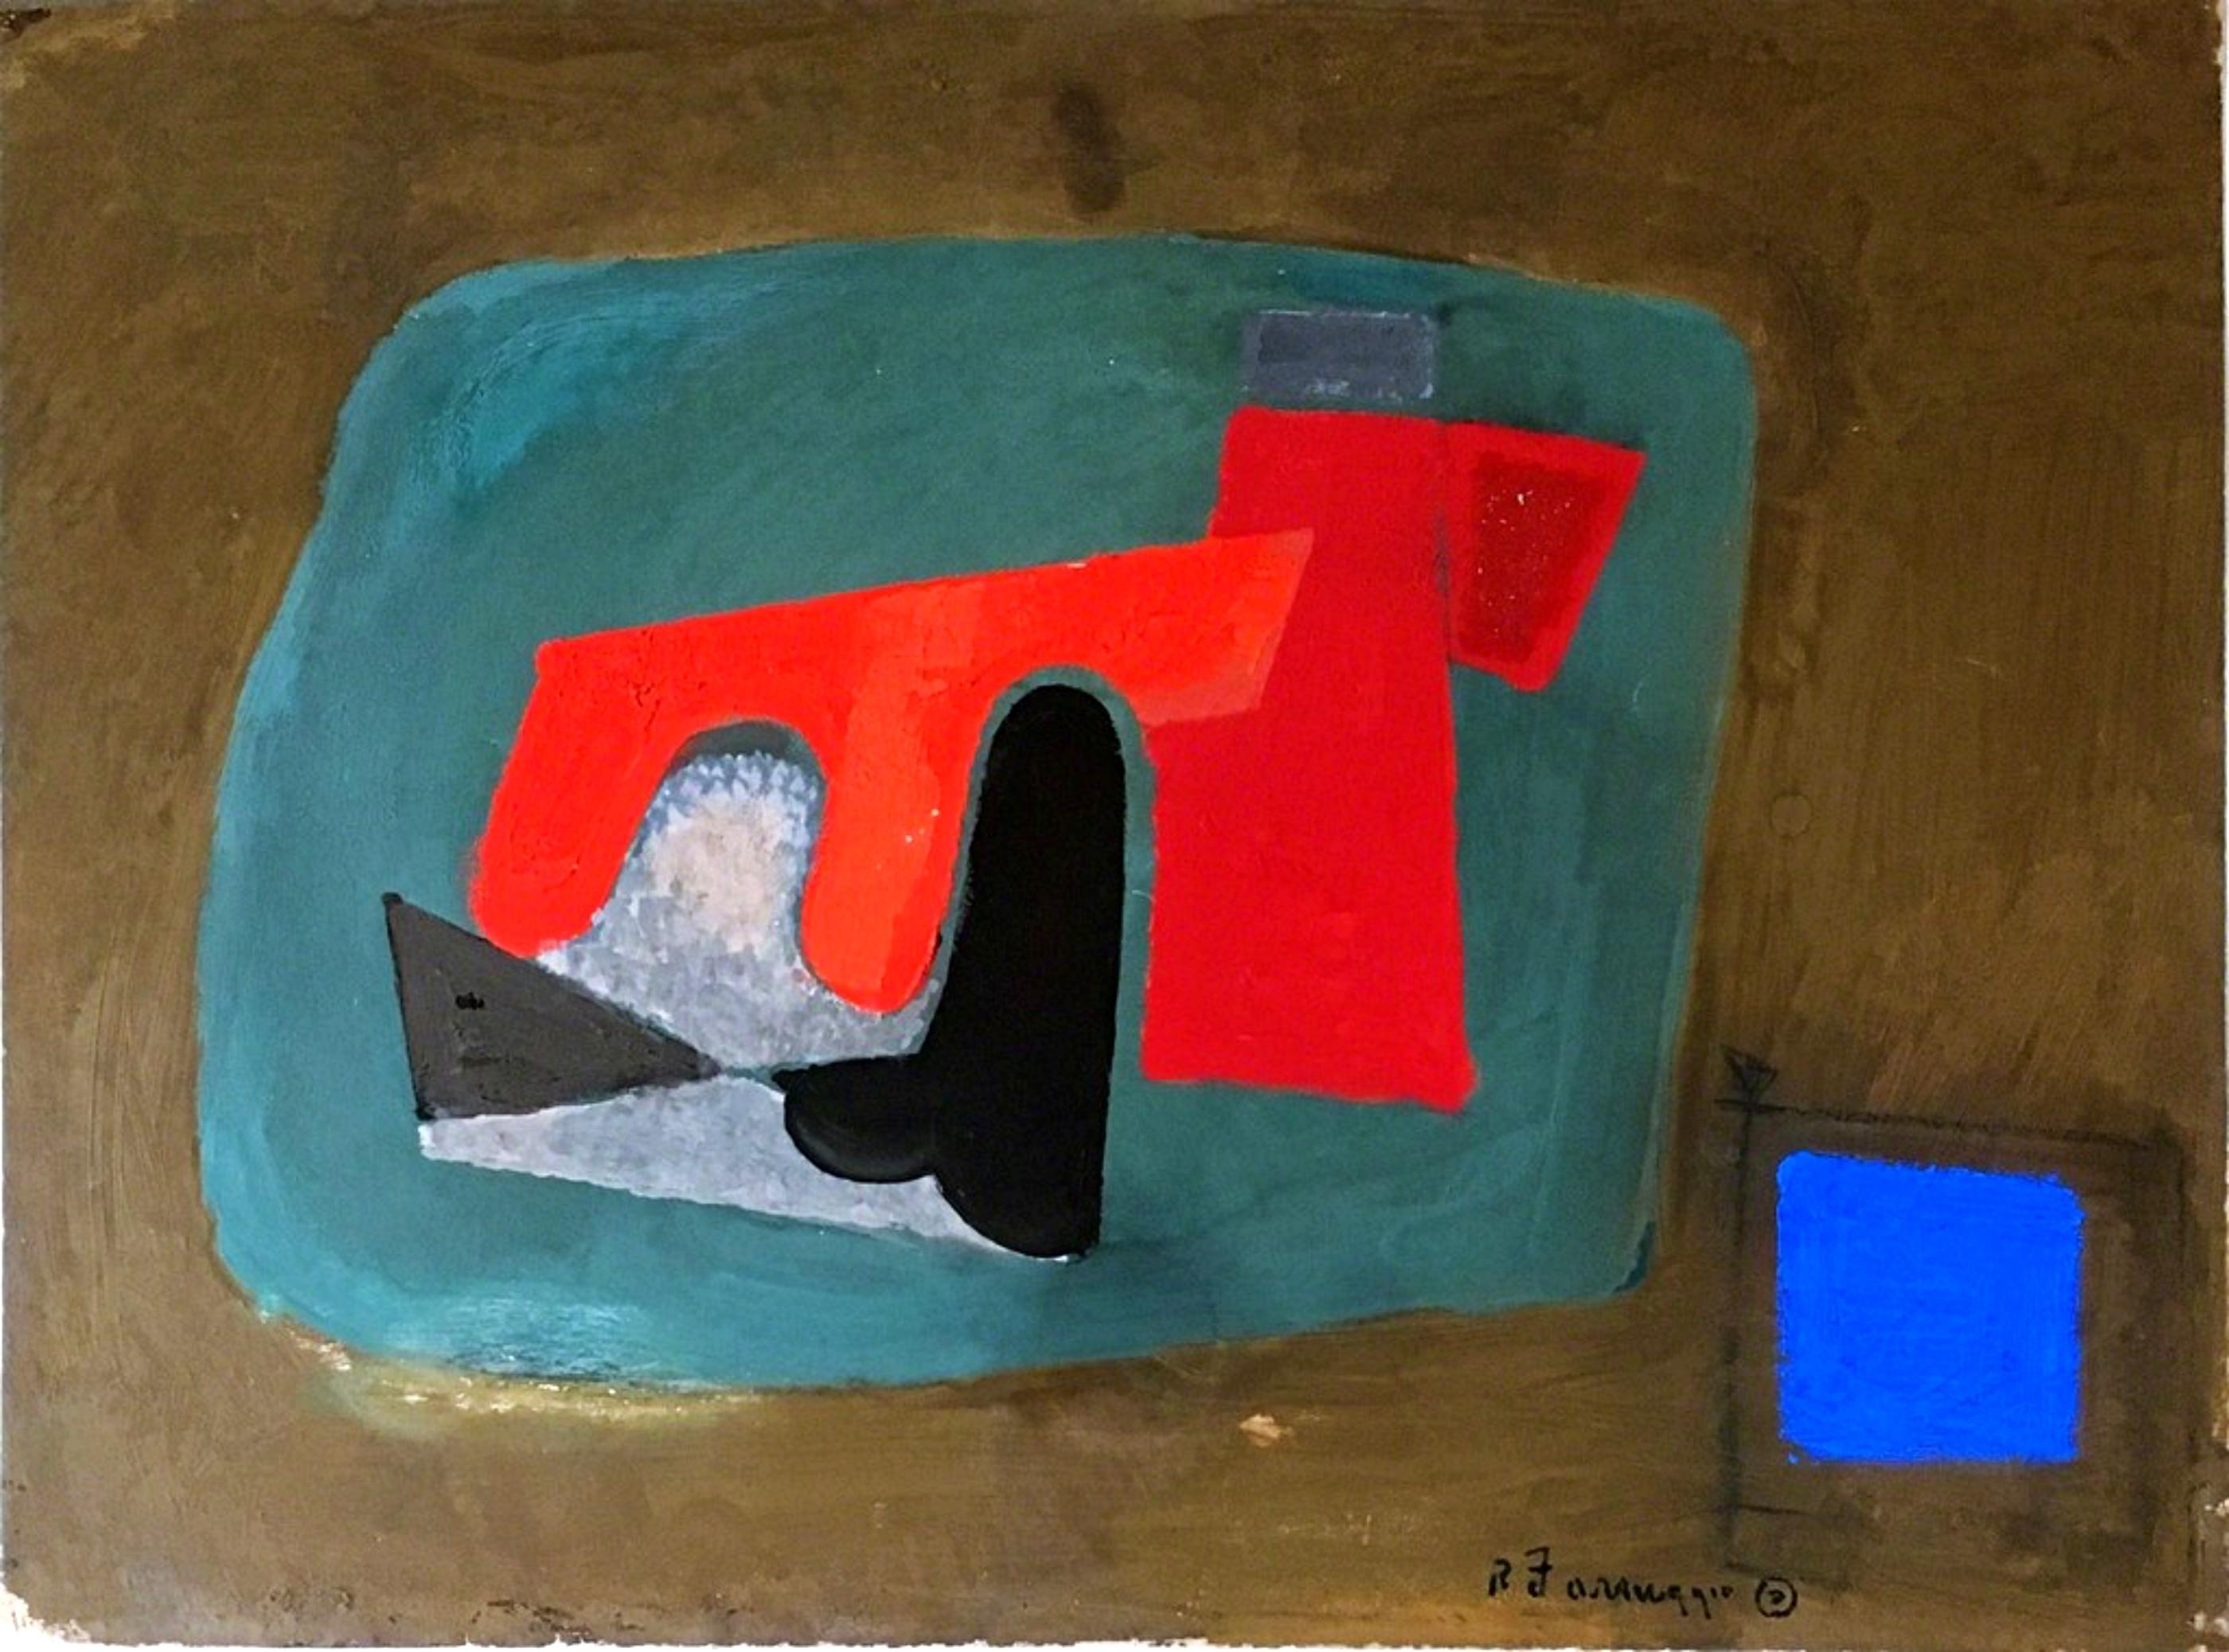 Remo Farrugio Abstract Painting - Duet (Mid century modern abstraction) original (unique) painting by renowned 